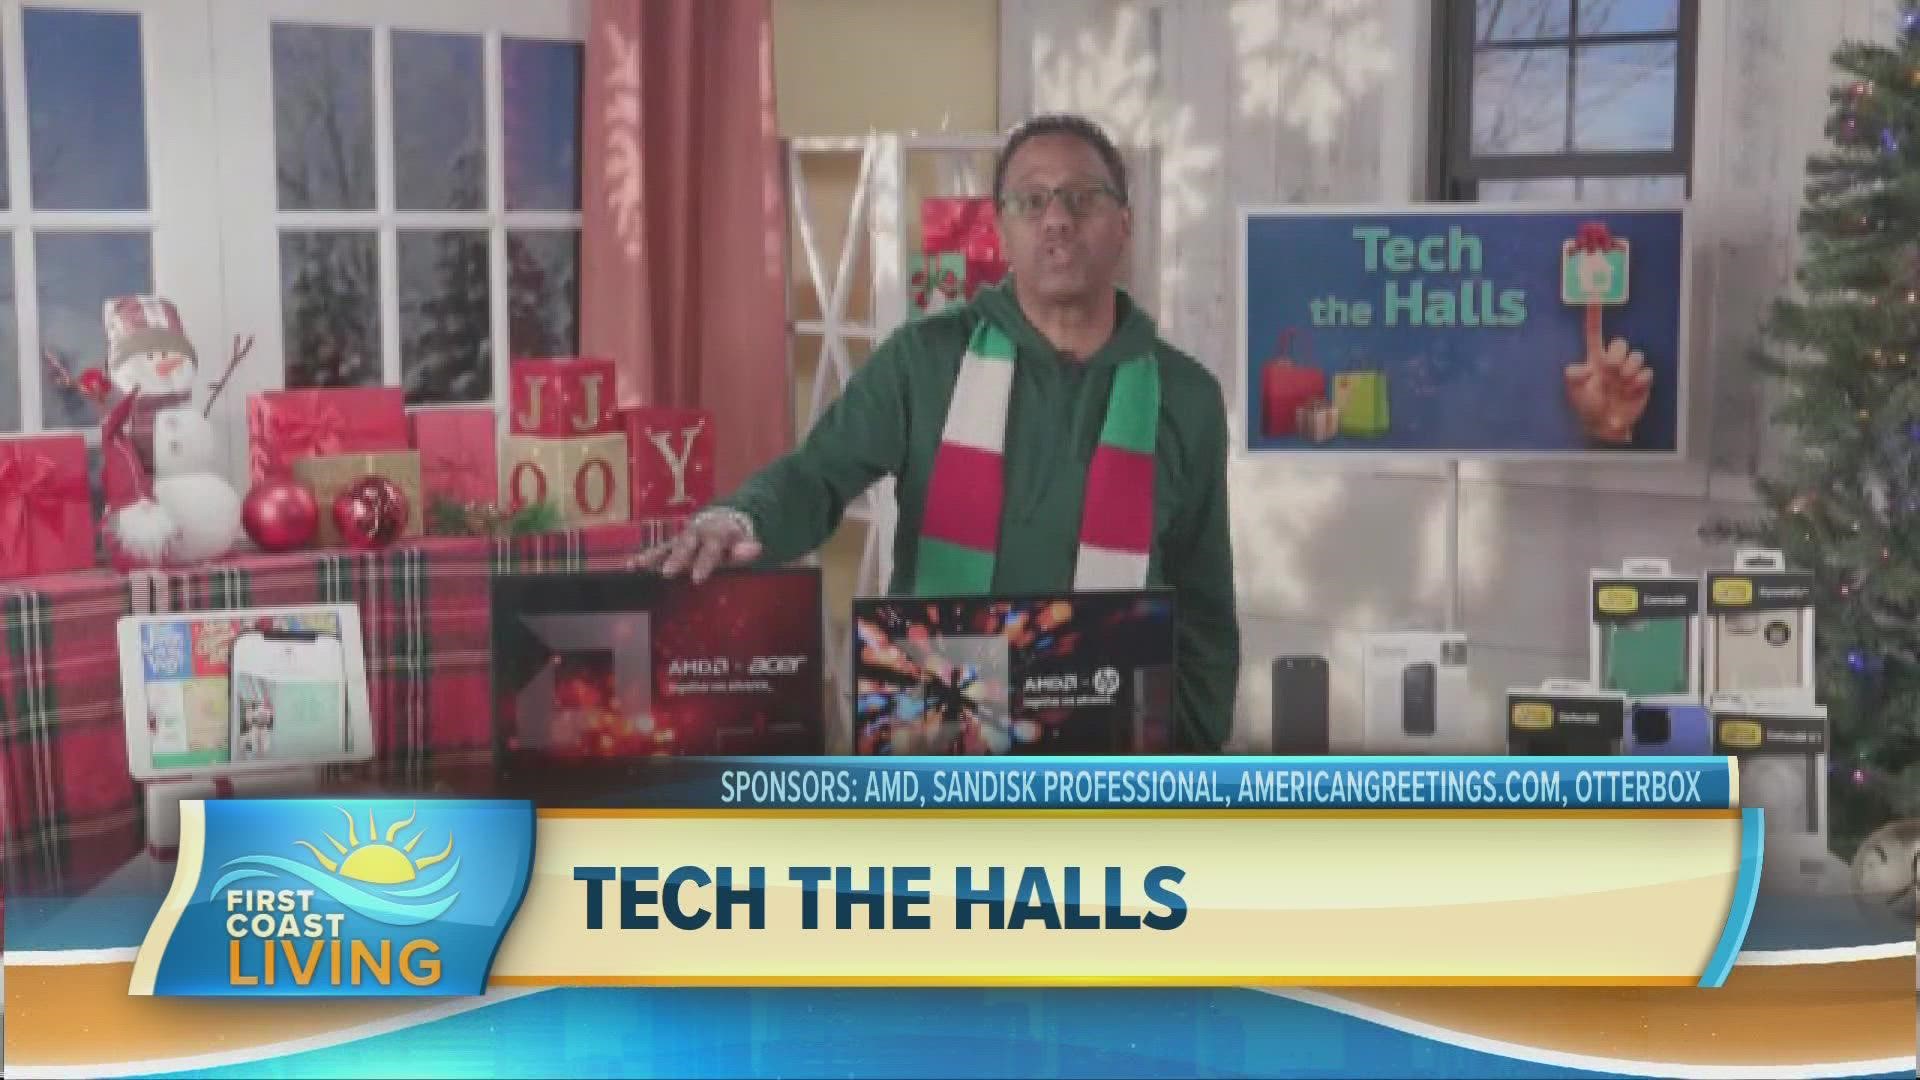 Award-winning Digital Lifestyle Contributor, Mario Armstrong helps us tech the halls with some of the top tech gifts and ideas.